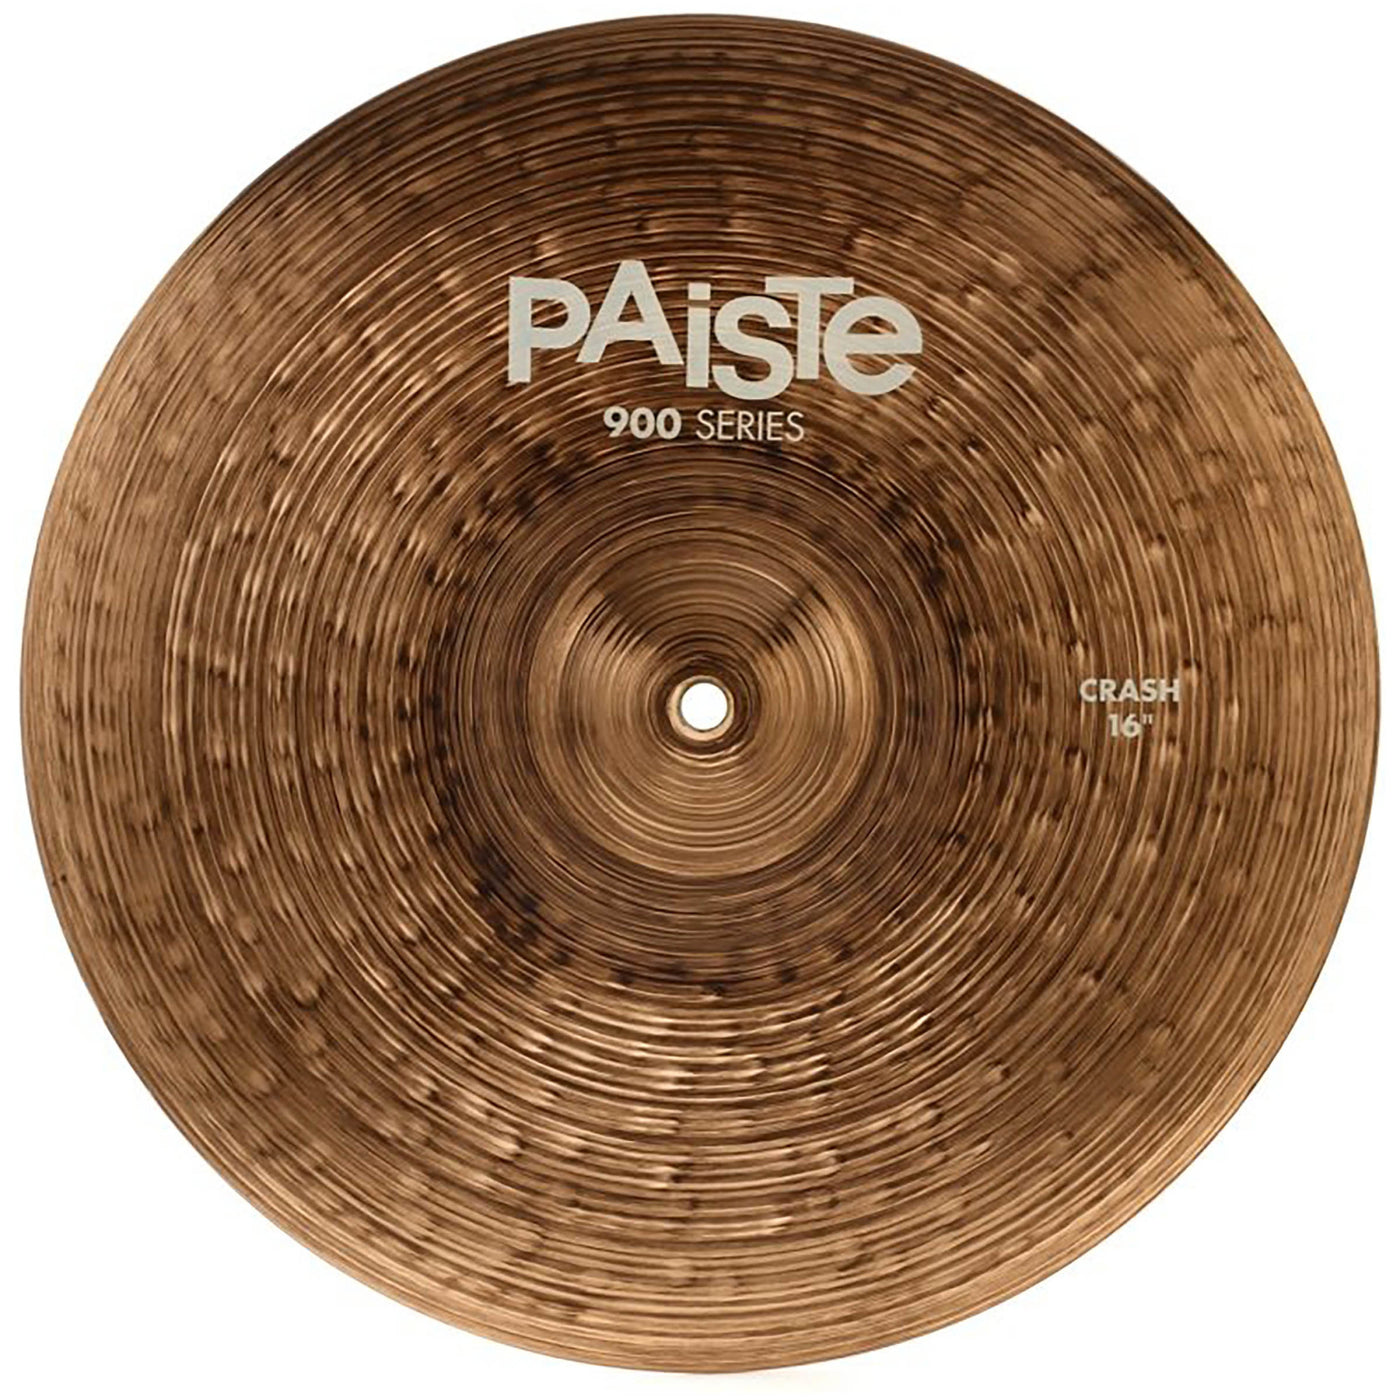 Paiste Crash Cymbal, 900 Series, Percussion Instrument for Drums, 16"